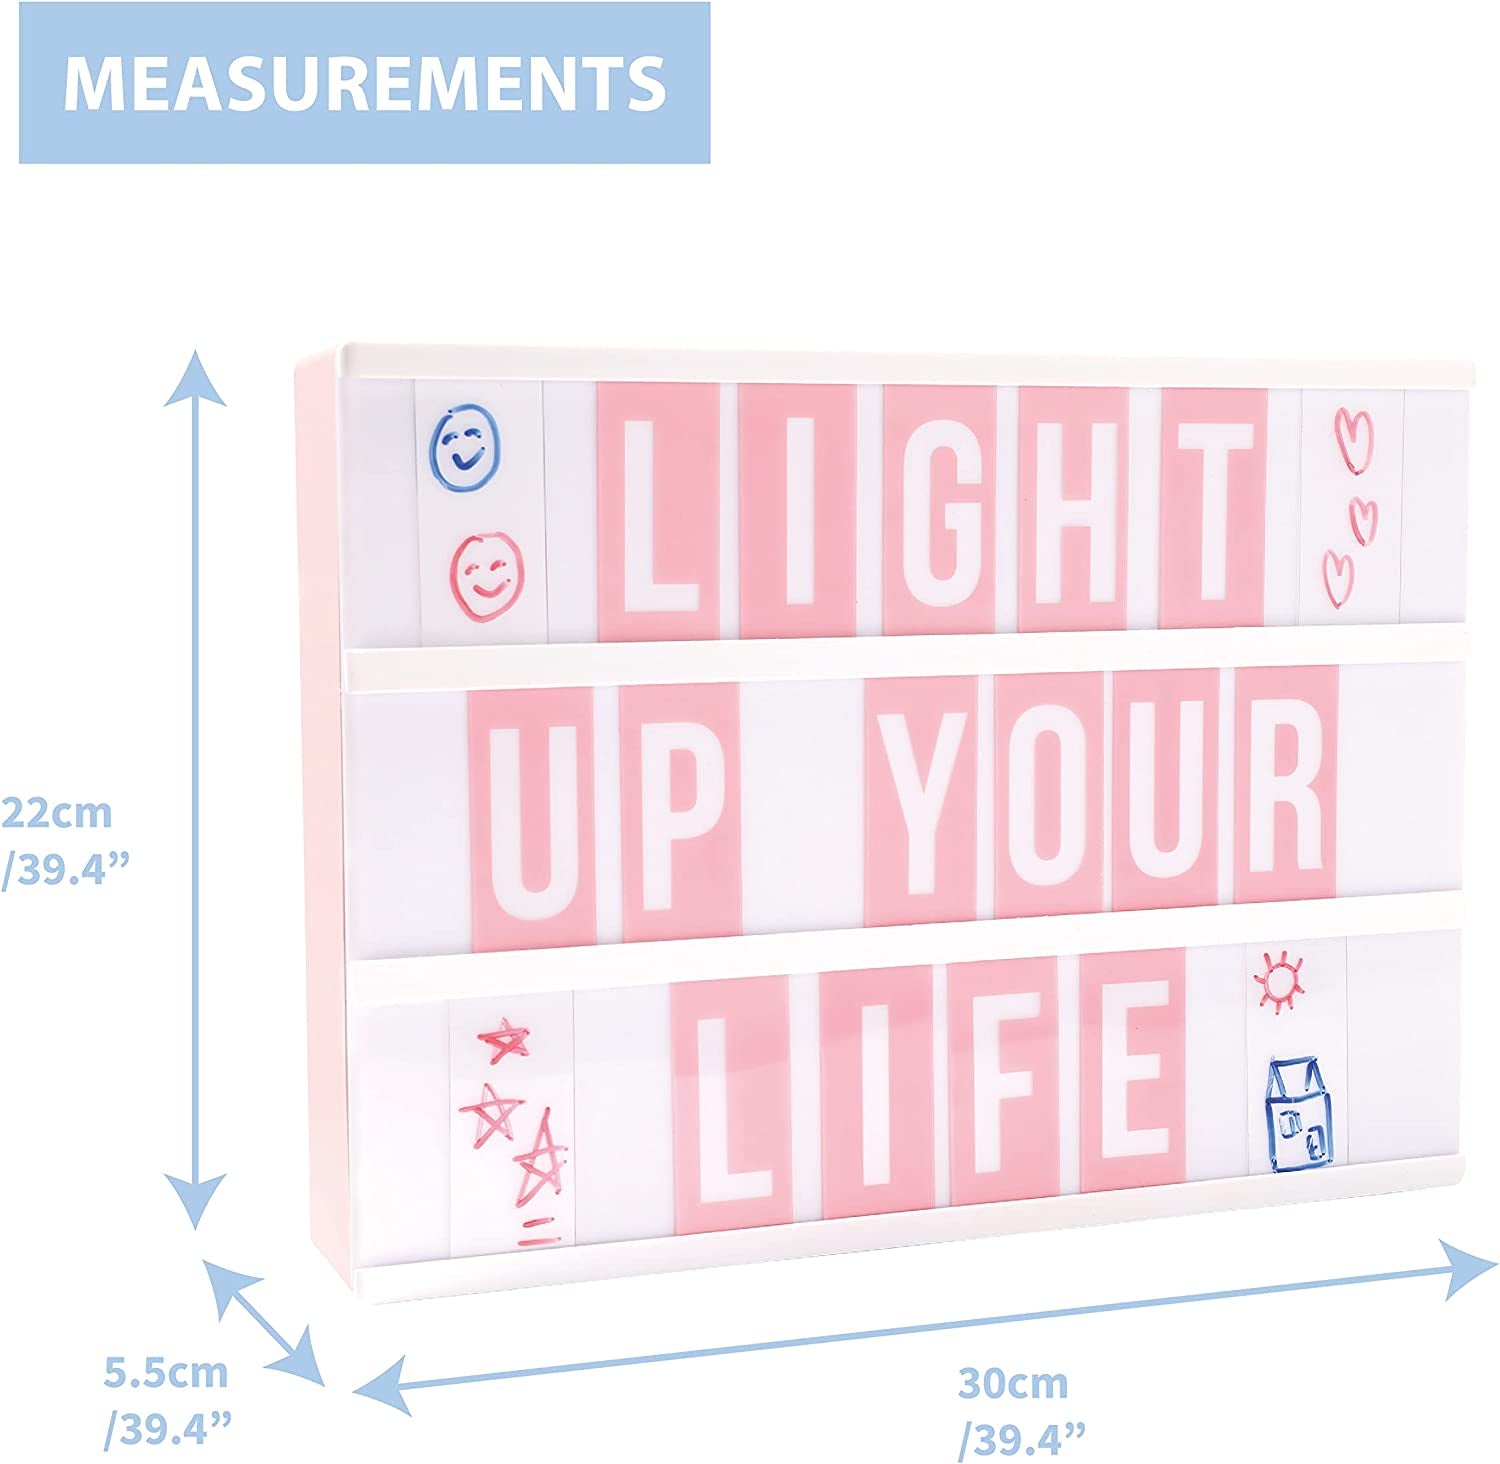 Cinema Light Box with 425 Letters | Emojis & Symbols & 3 Markers | USB Cable Cinematic Led Light Box Pink for Girls Boys Home Decoration | Novelty Gift Weddings Christmas Birthdays (Pink)